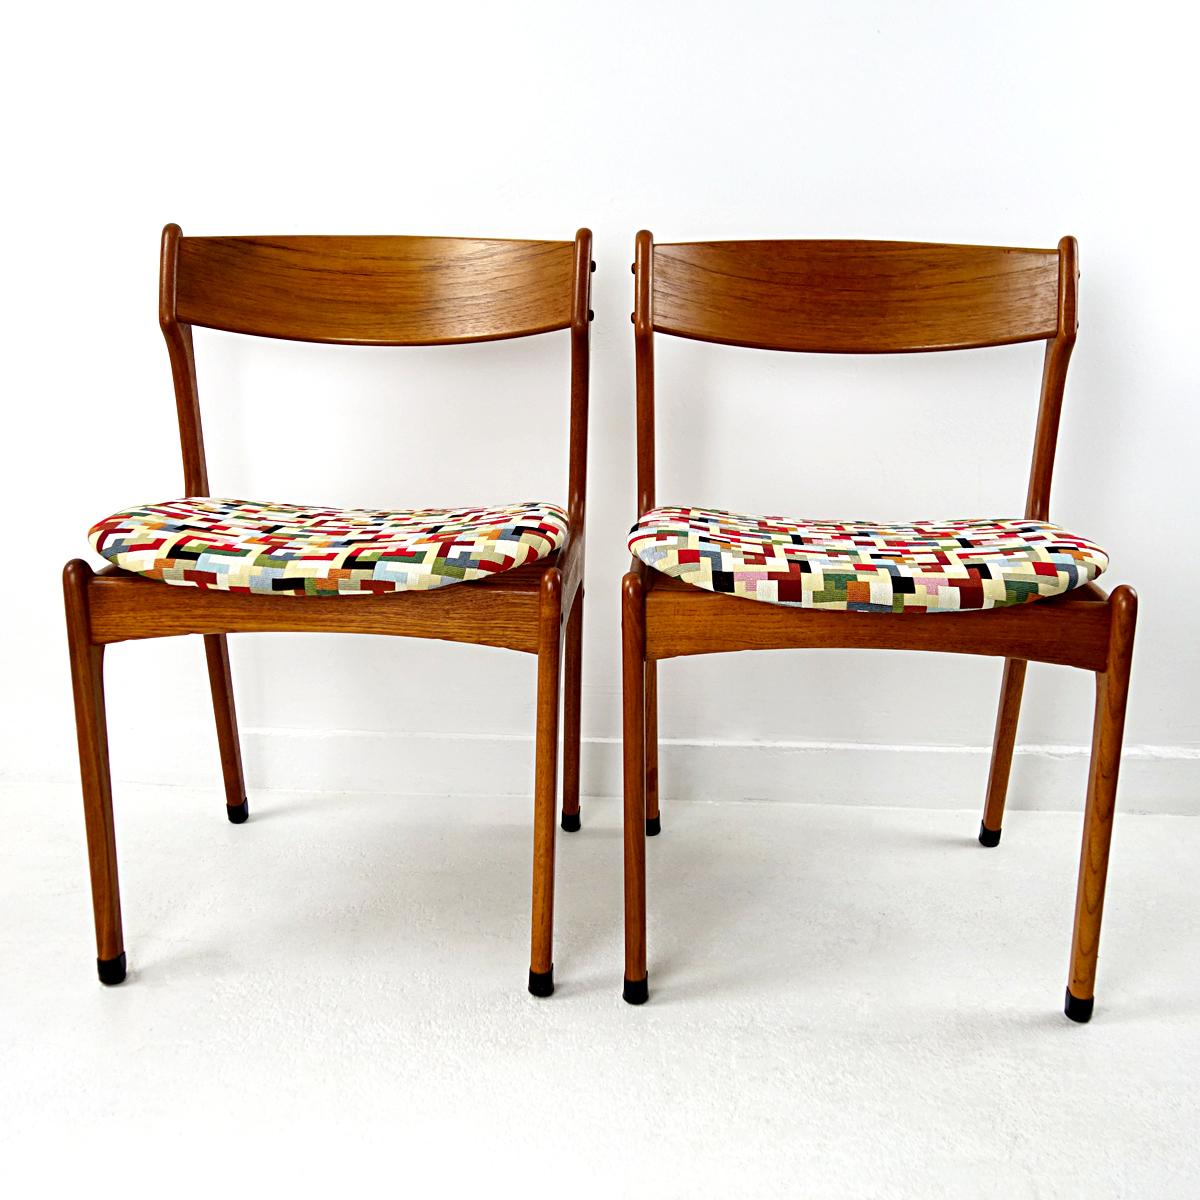 These very elegantly designed dining chairs are made of teak wood. They have some eye-catching details such as the visually floating seats, the protective feet covers and the visual wood connections.
They have been reupholstered with a colorful yet